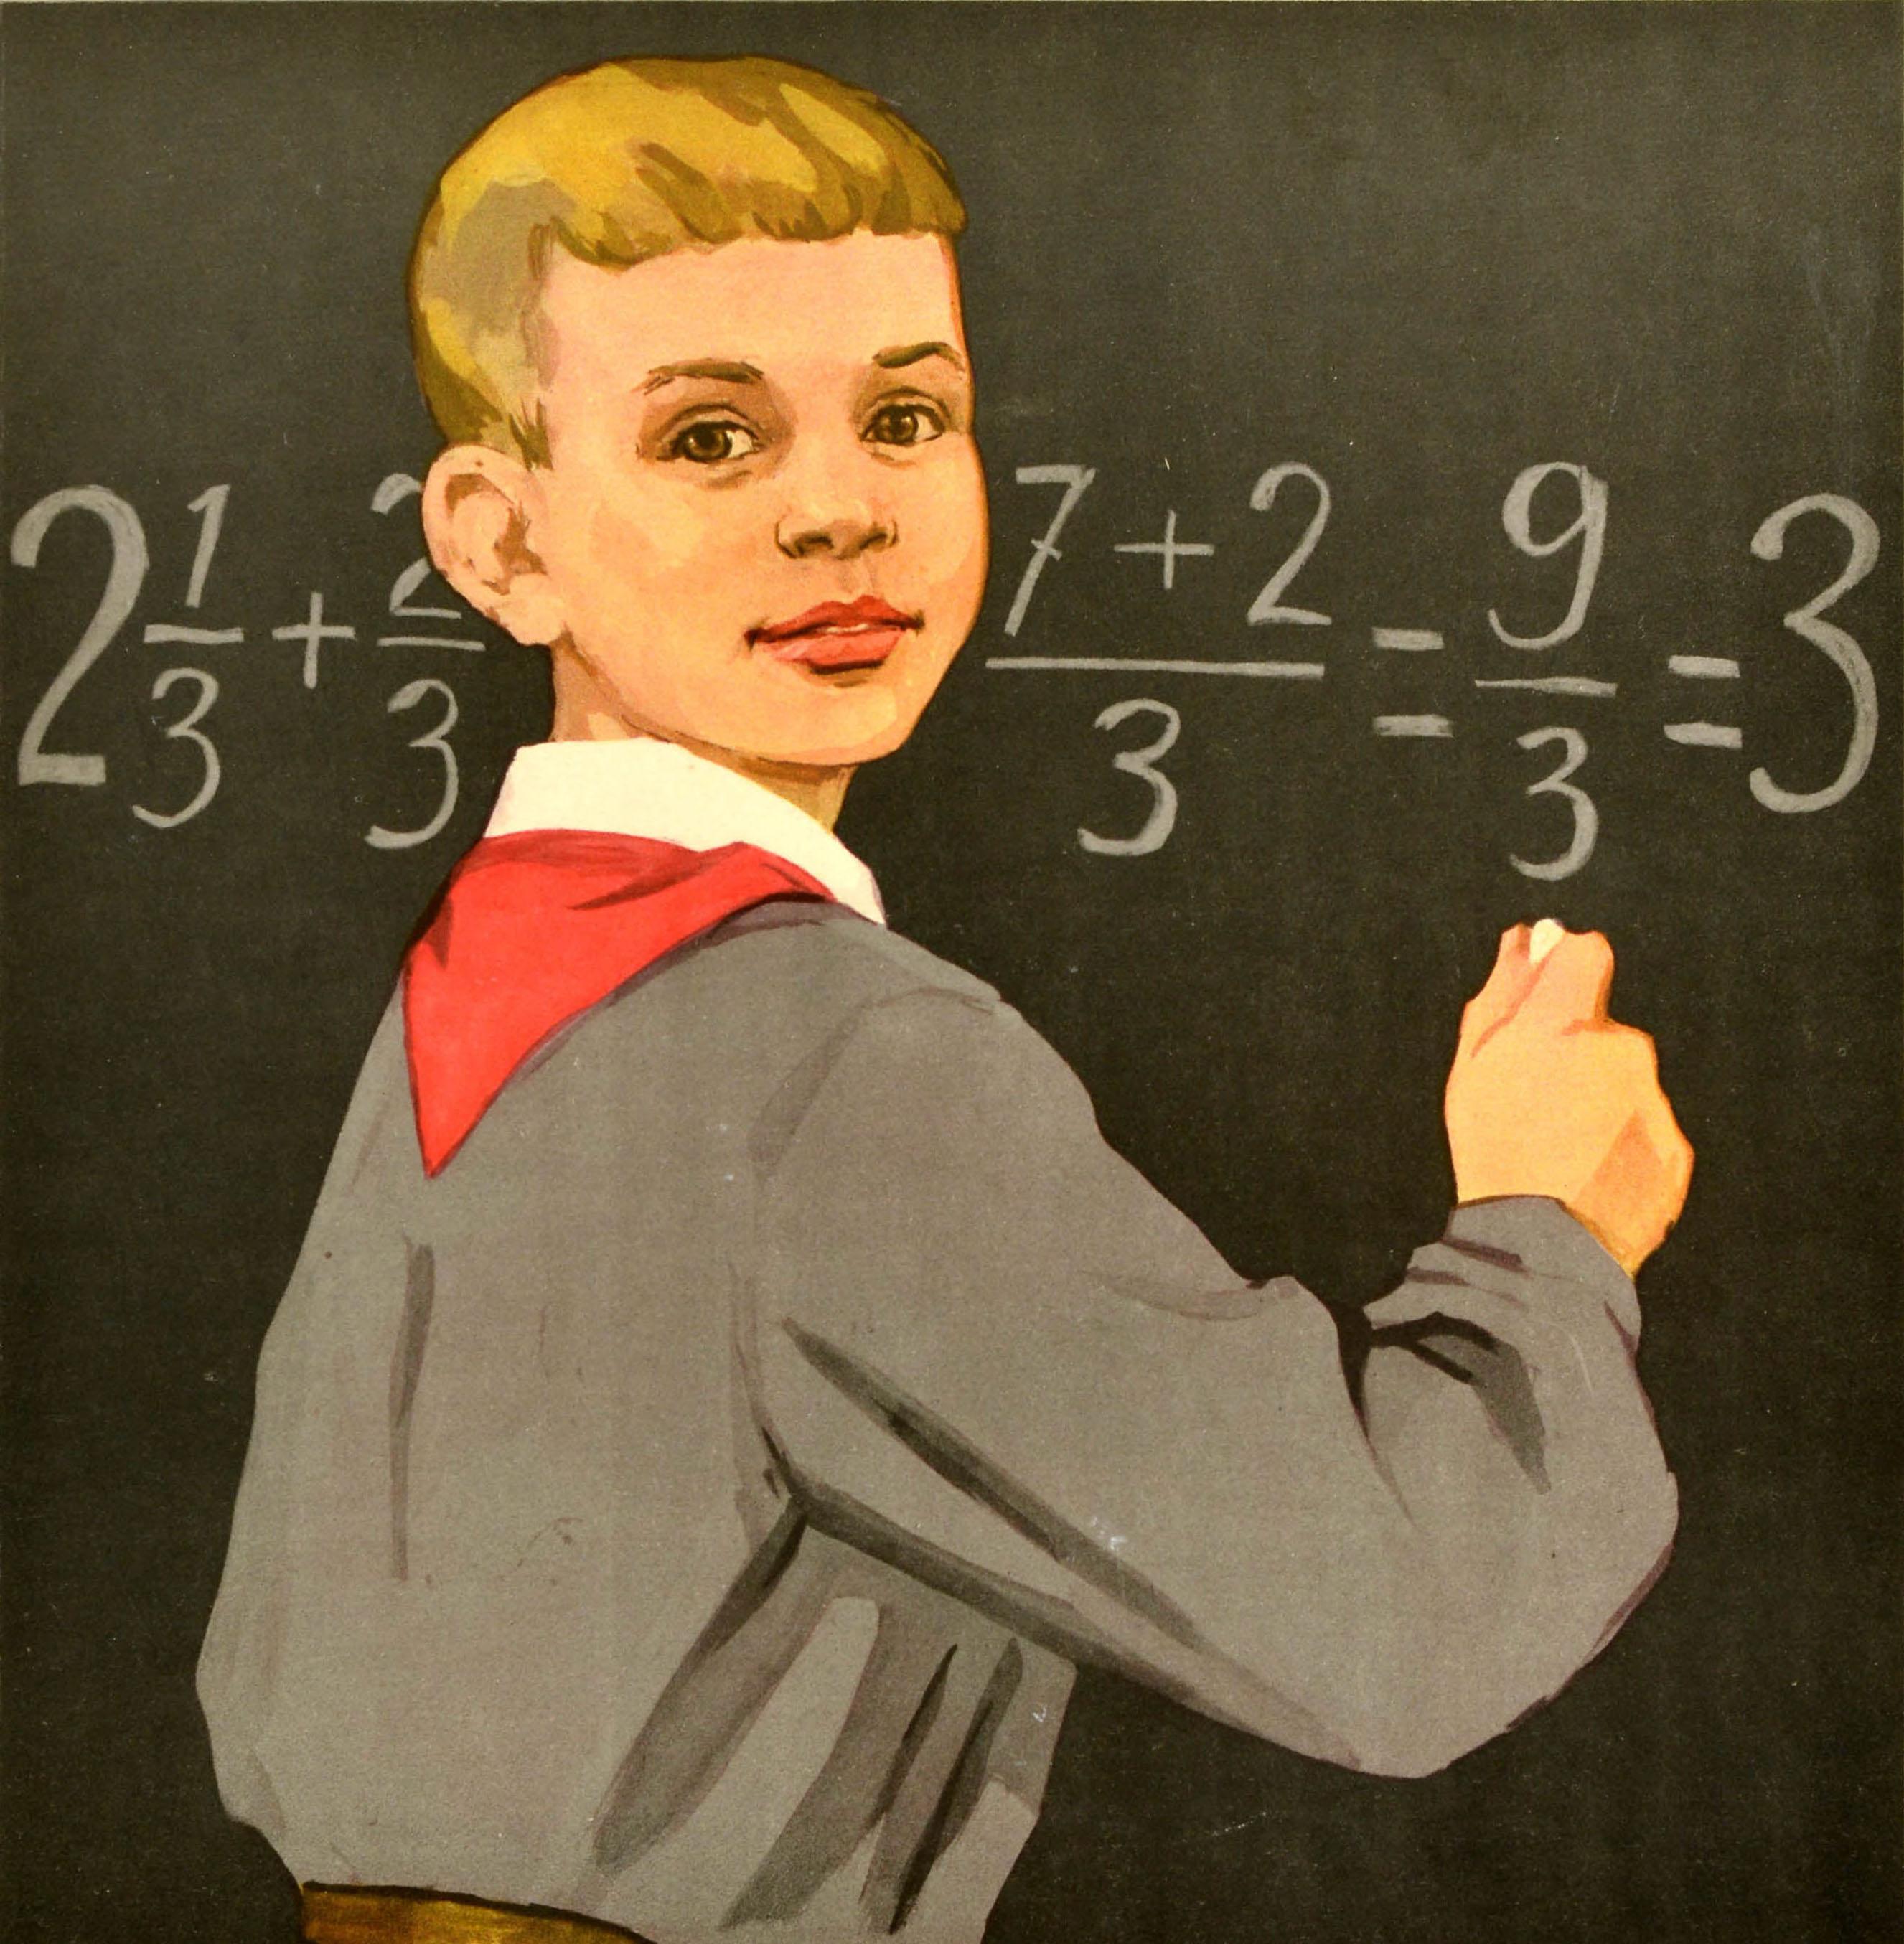 Original vintage Soviet propaganda poster - A pioneer is a diligent student he is disciplined and polite - featuring an illustration of a young school boy wearing a red neck tie of the Pioneers, standing in front of a chalk board solving a maths